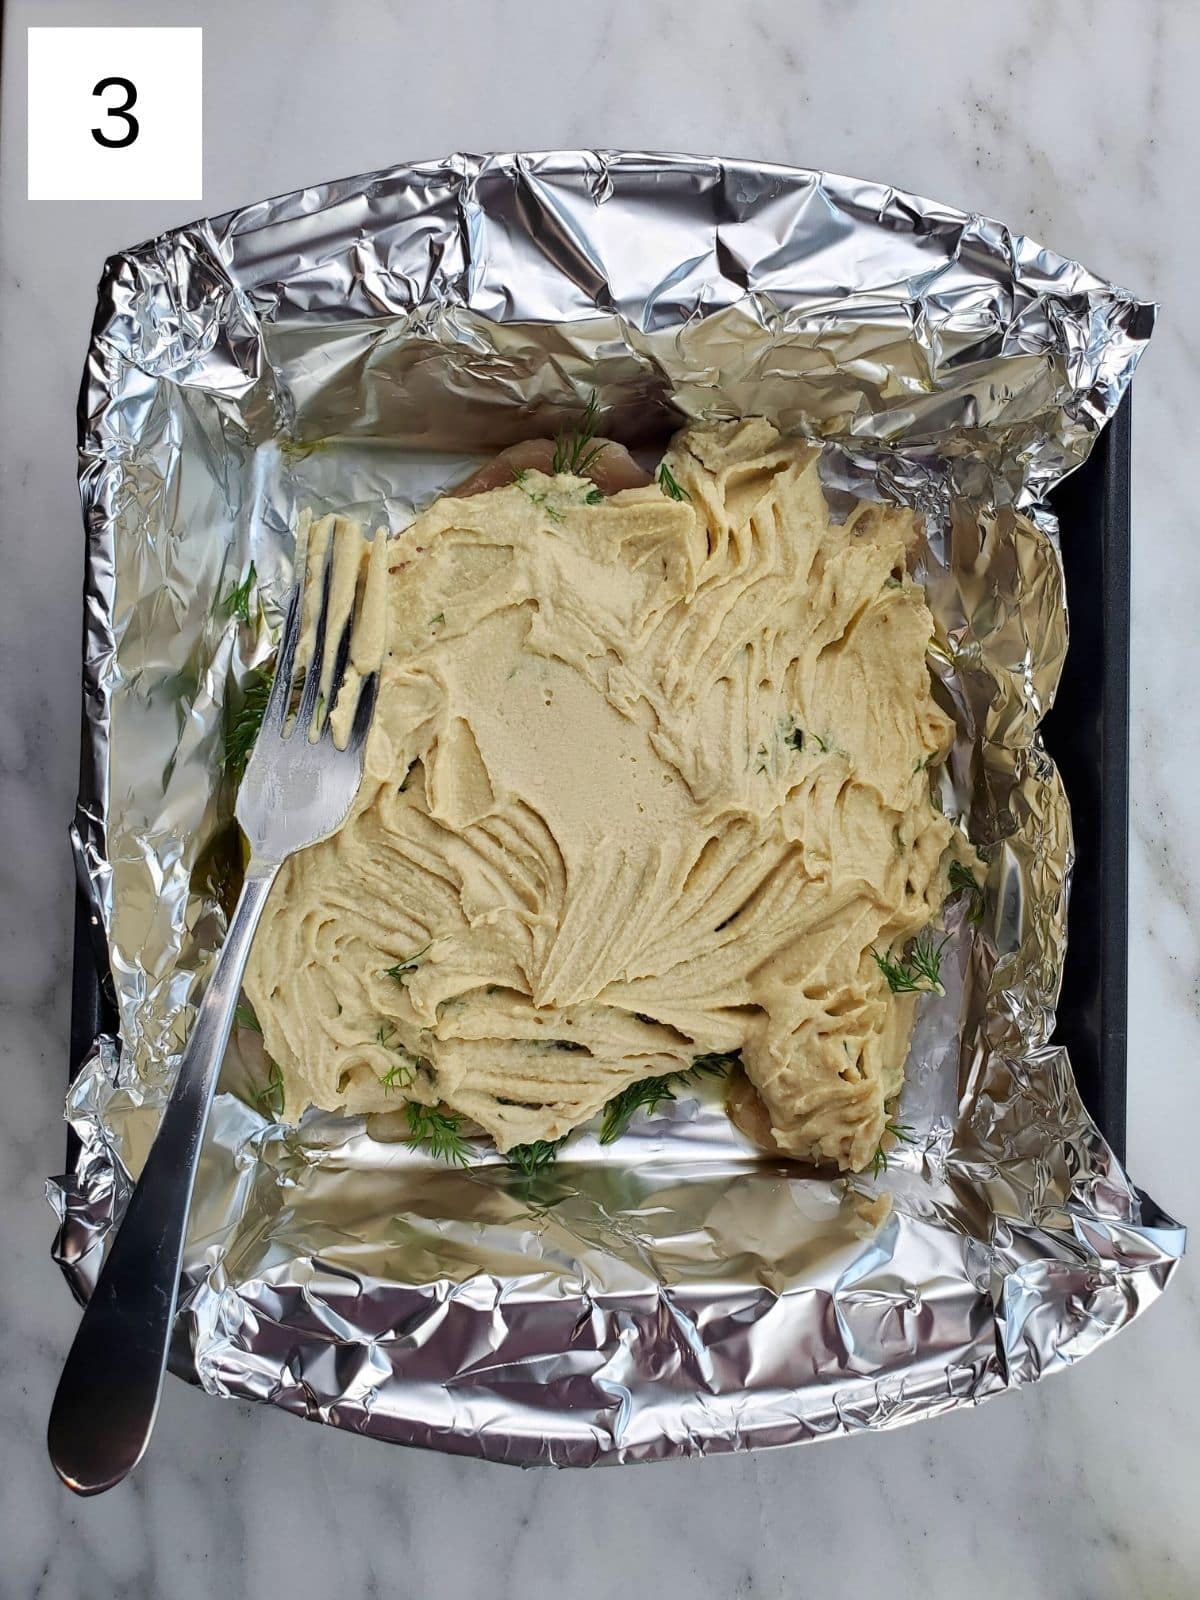 chicken tenders, topped with seasonings and hummus, arranged on a foil-lined baking tray.